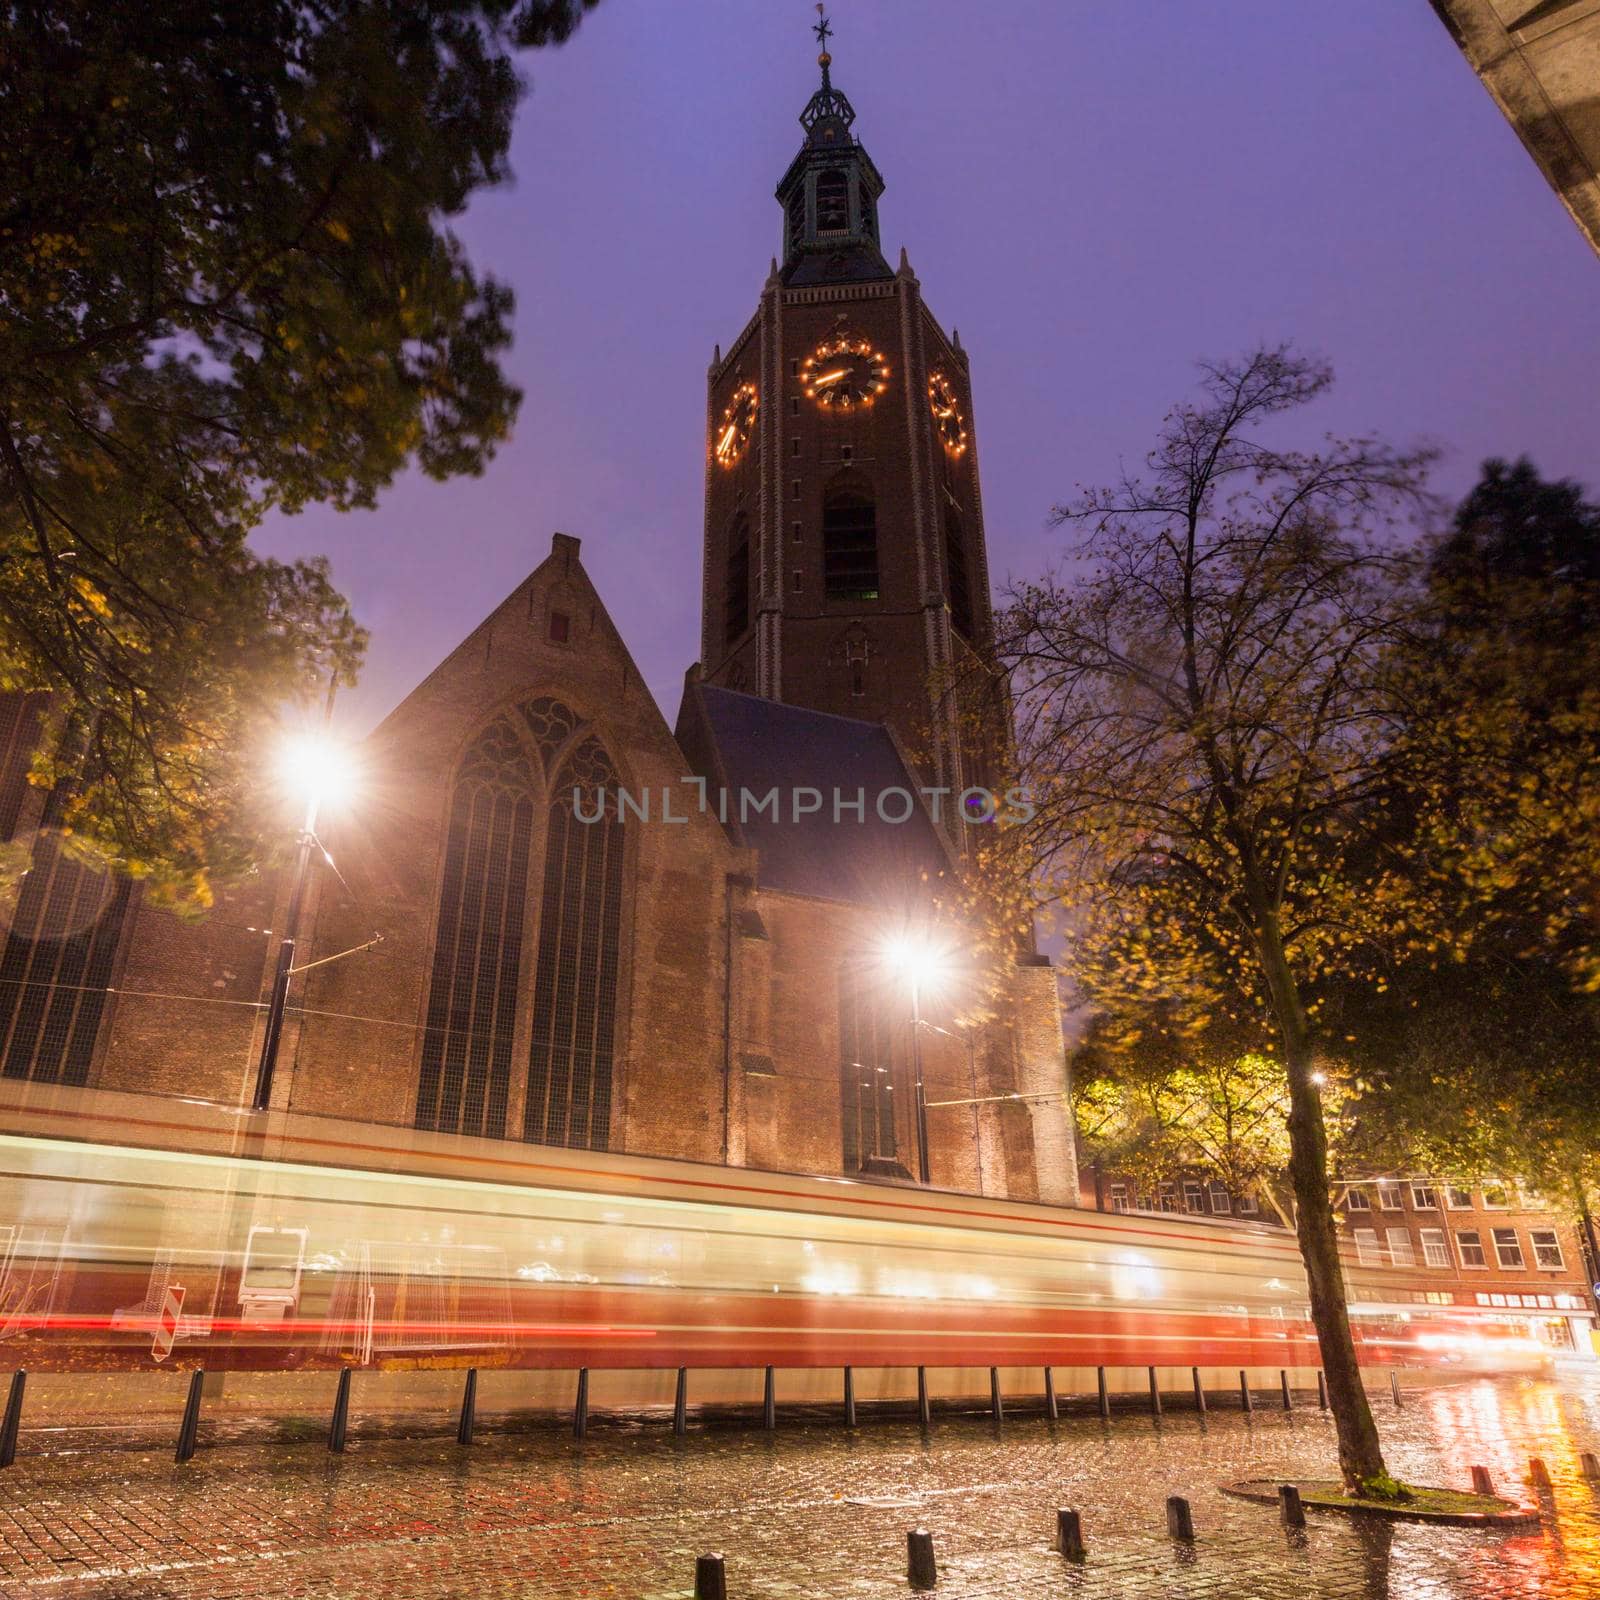 The Hague architecture at dawn by benkrut